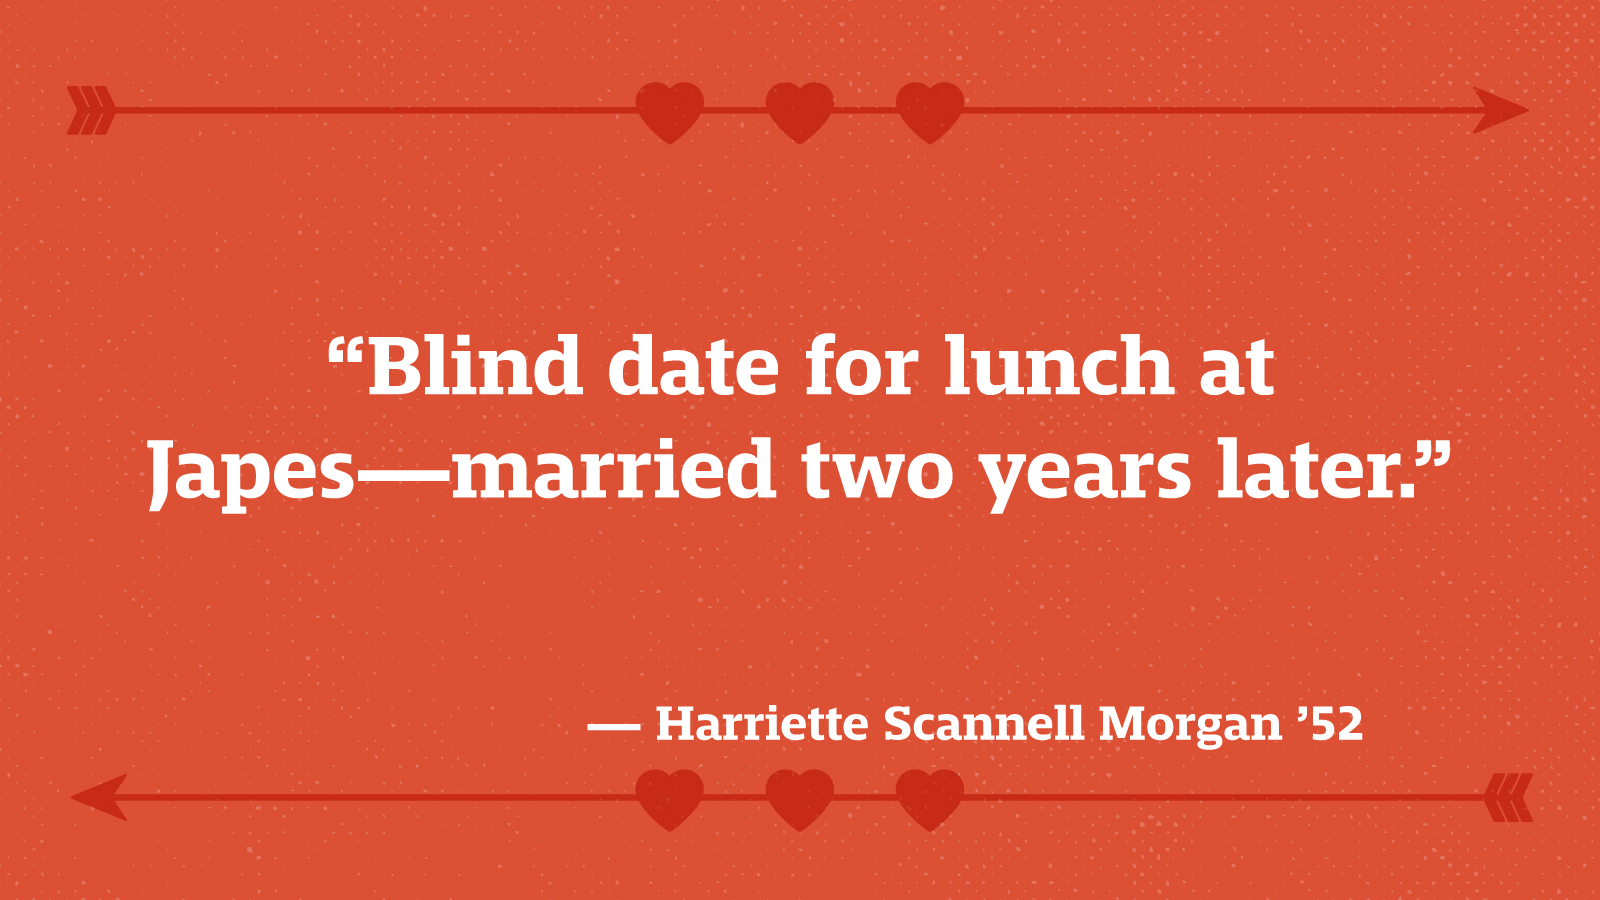 “Blind date for lunch at Japes—married two years later.” — Harriette Scannell Morgan ’52